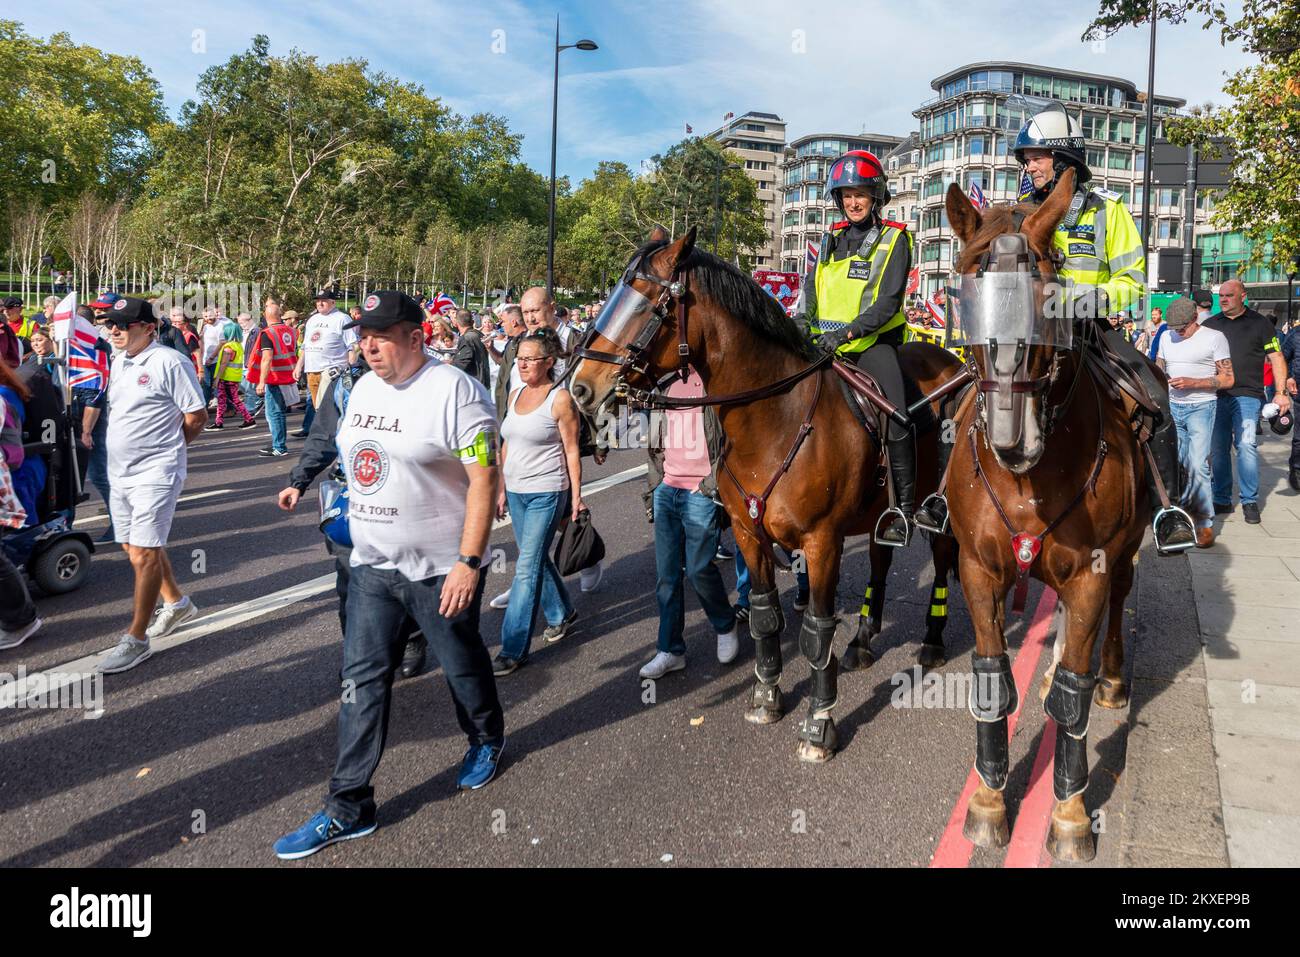 Democratic Football Lads Alliance, DFLA, marched towards Parliament, London, UK, in a protest demonstration against terrorism. Mounted police escort Stock Photo